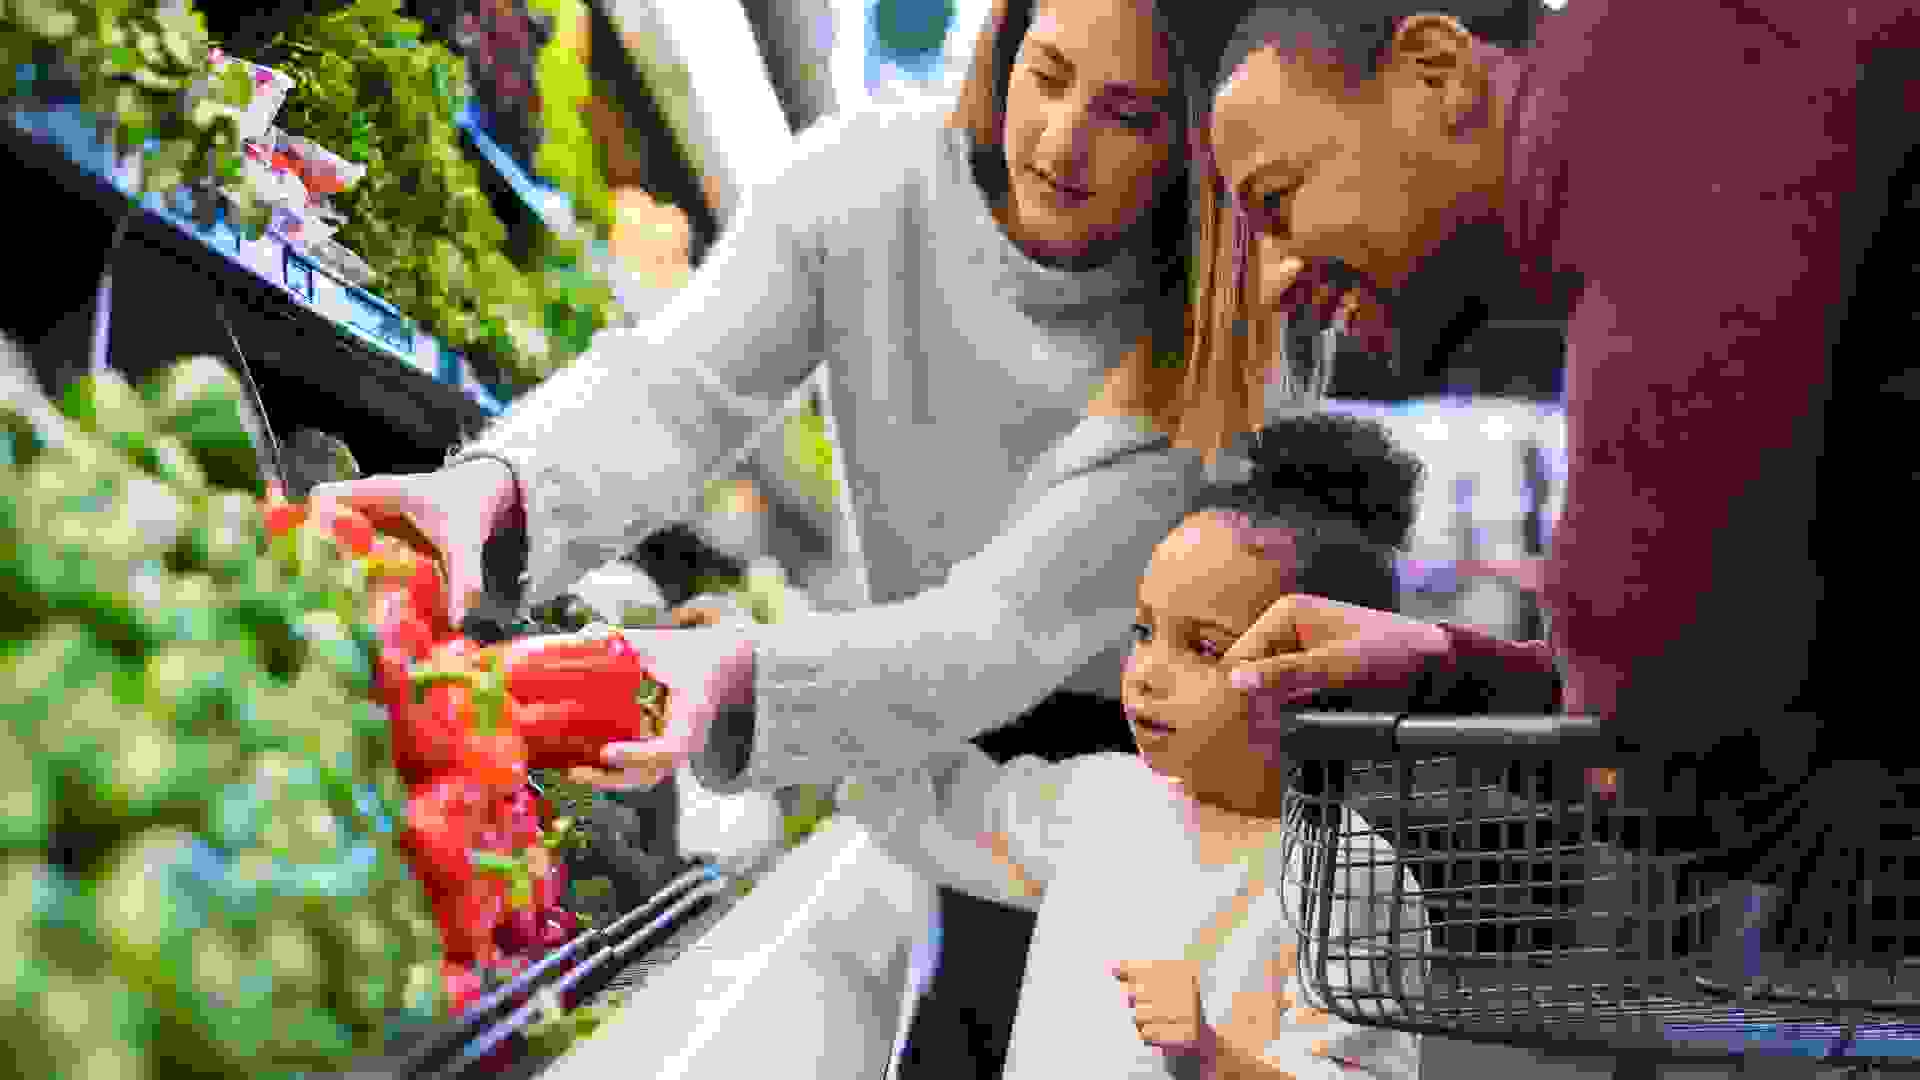 A pre-school age girl helps her parents pick out veggies in the produce section at the grocery store.